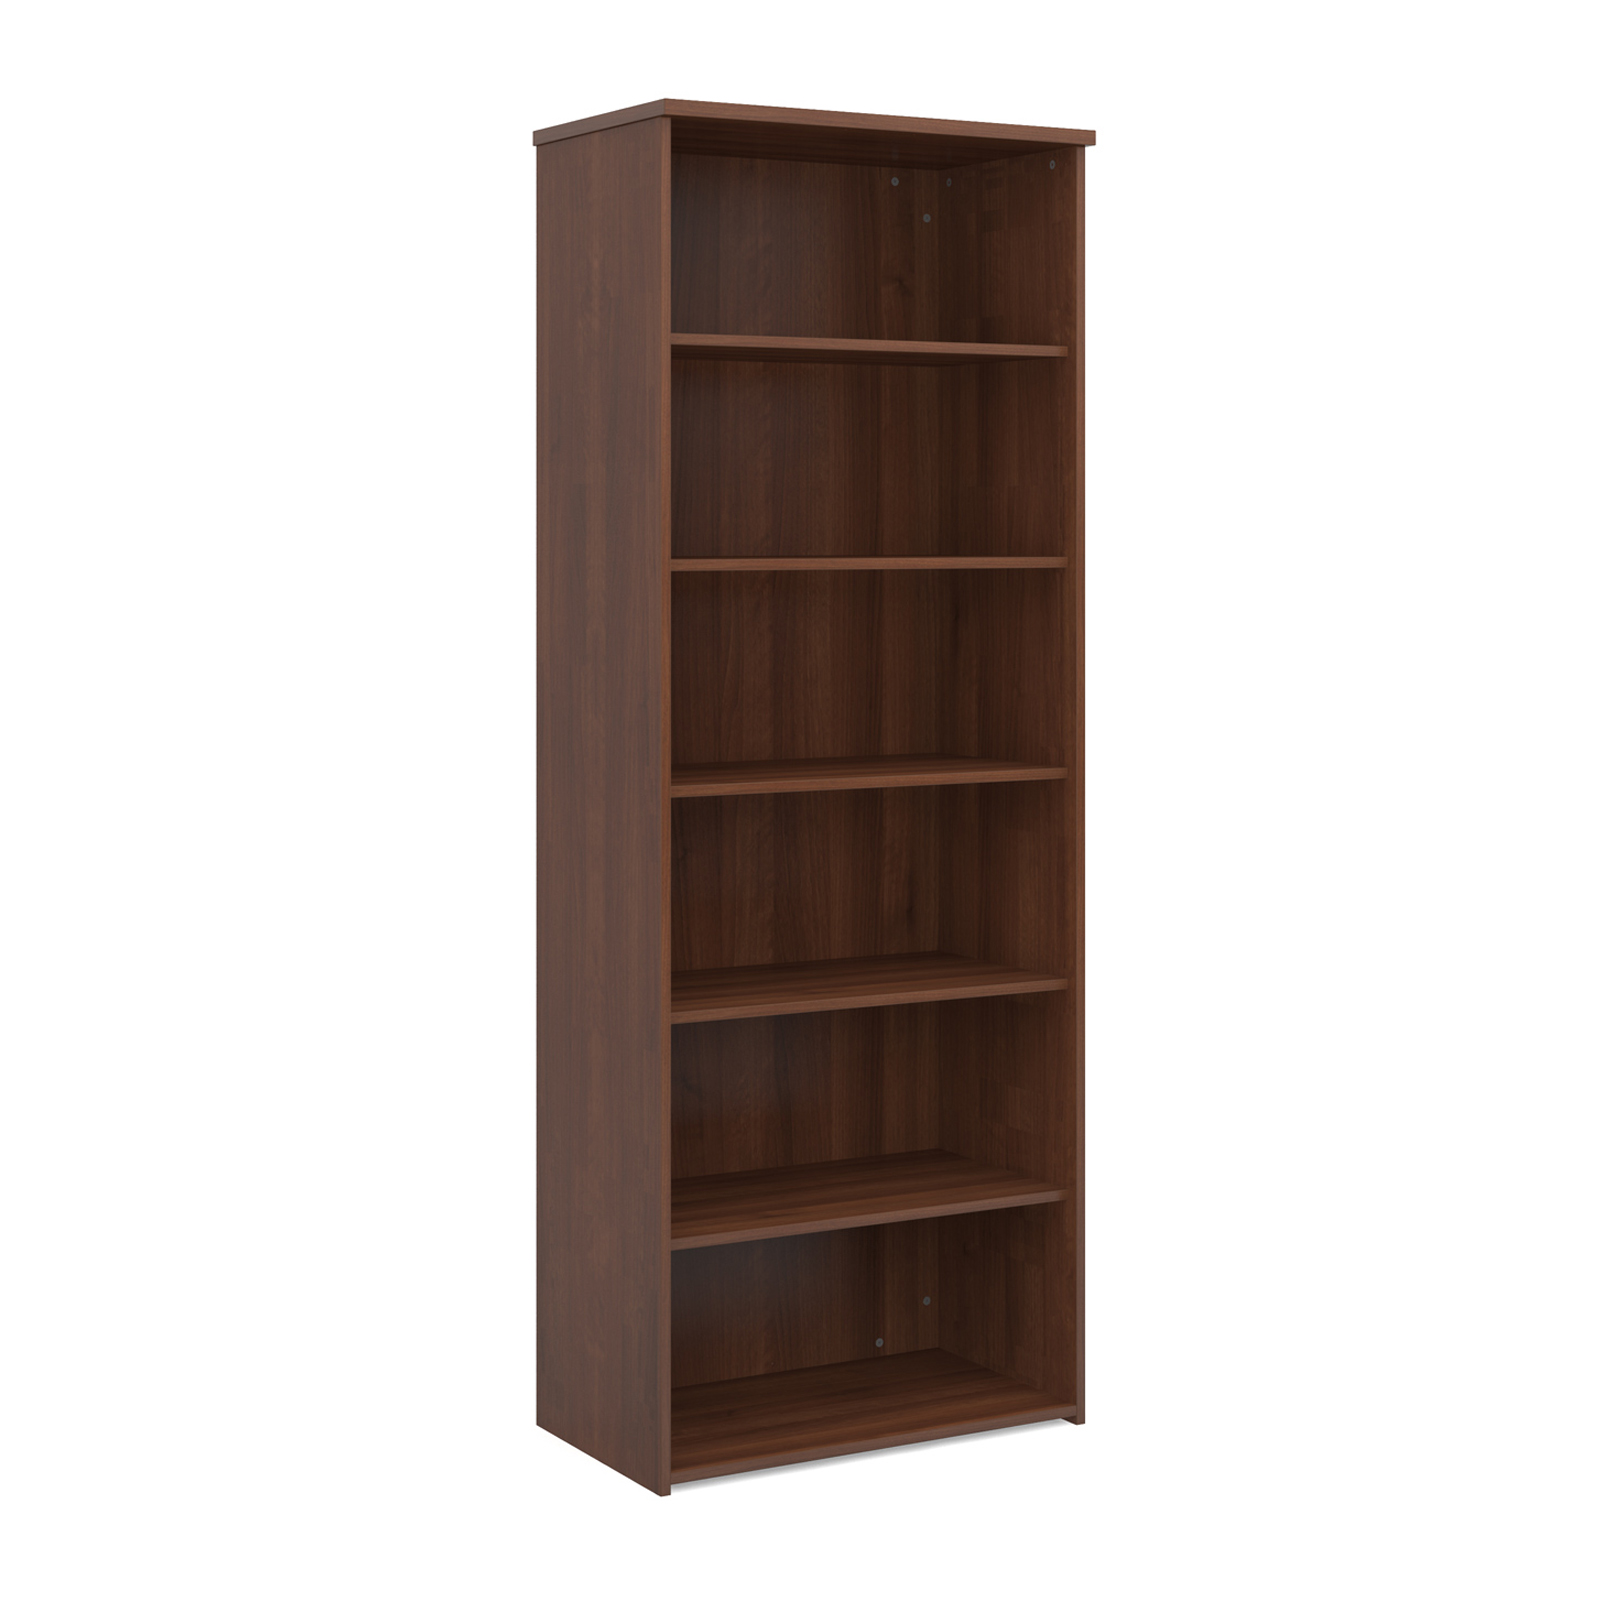 Over 1200mm High Universal bookcase 2140mm high with 5 shelves - walnut